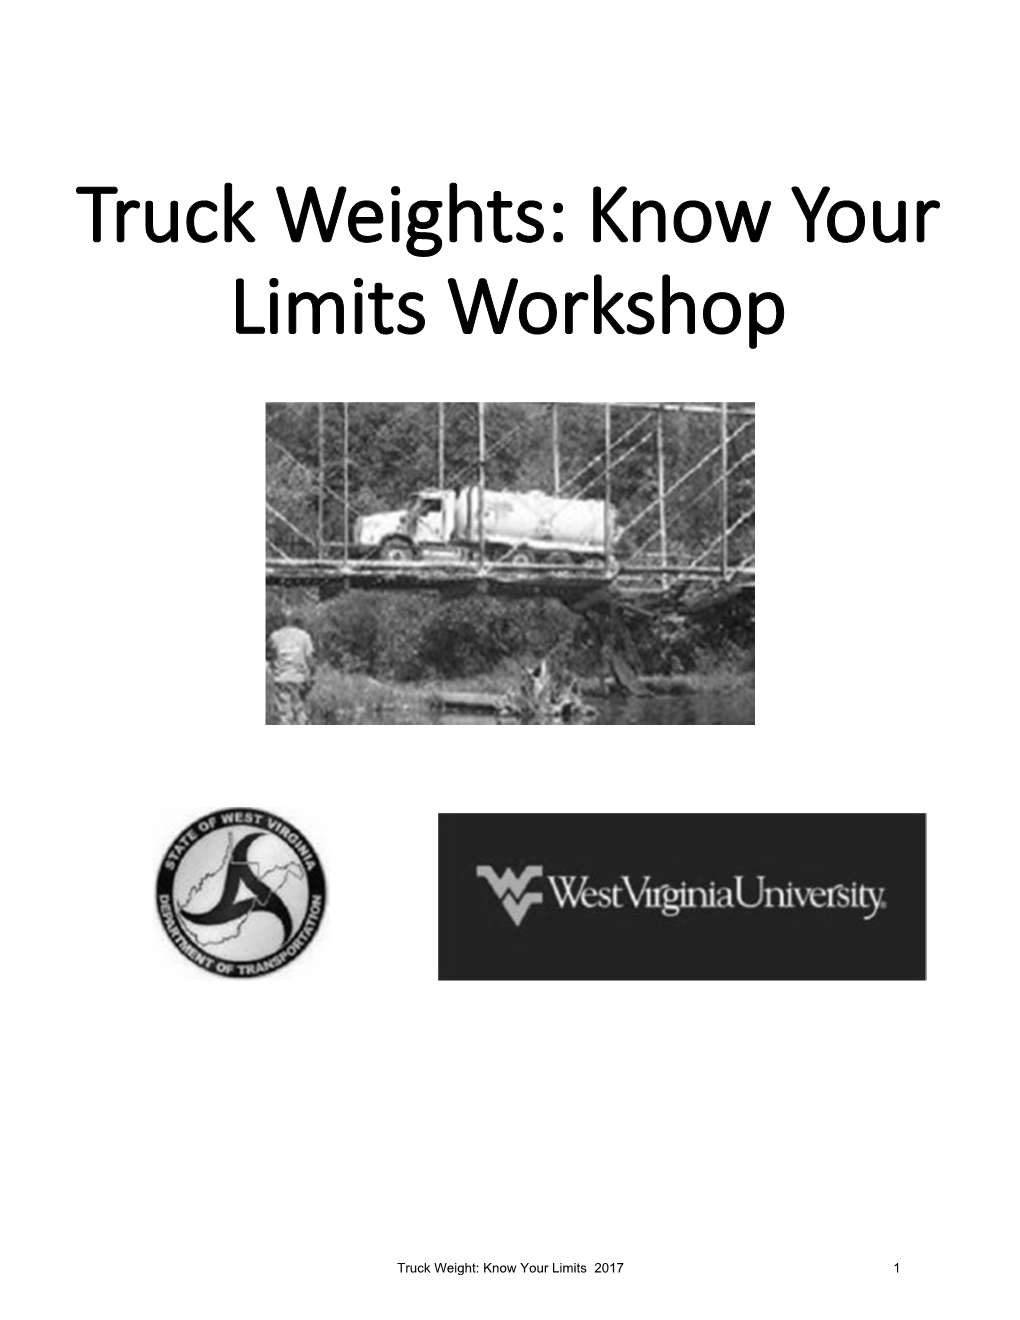 Truck Weight: Know Your Limits 2017 1 Truck Weight: Know Your Limits 2017 2 Workshop Websites